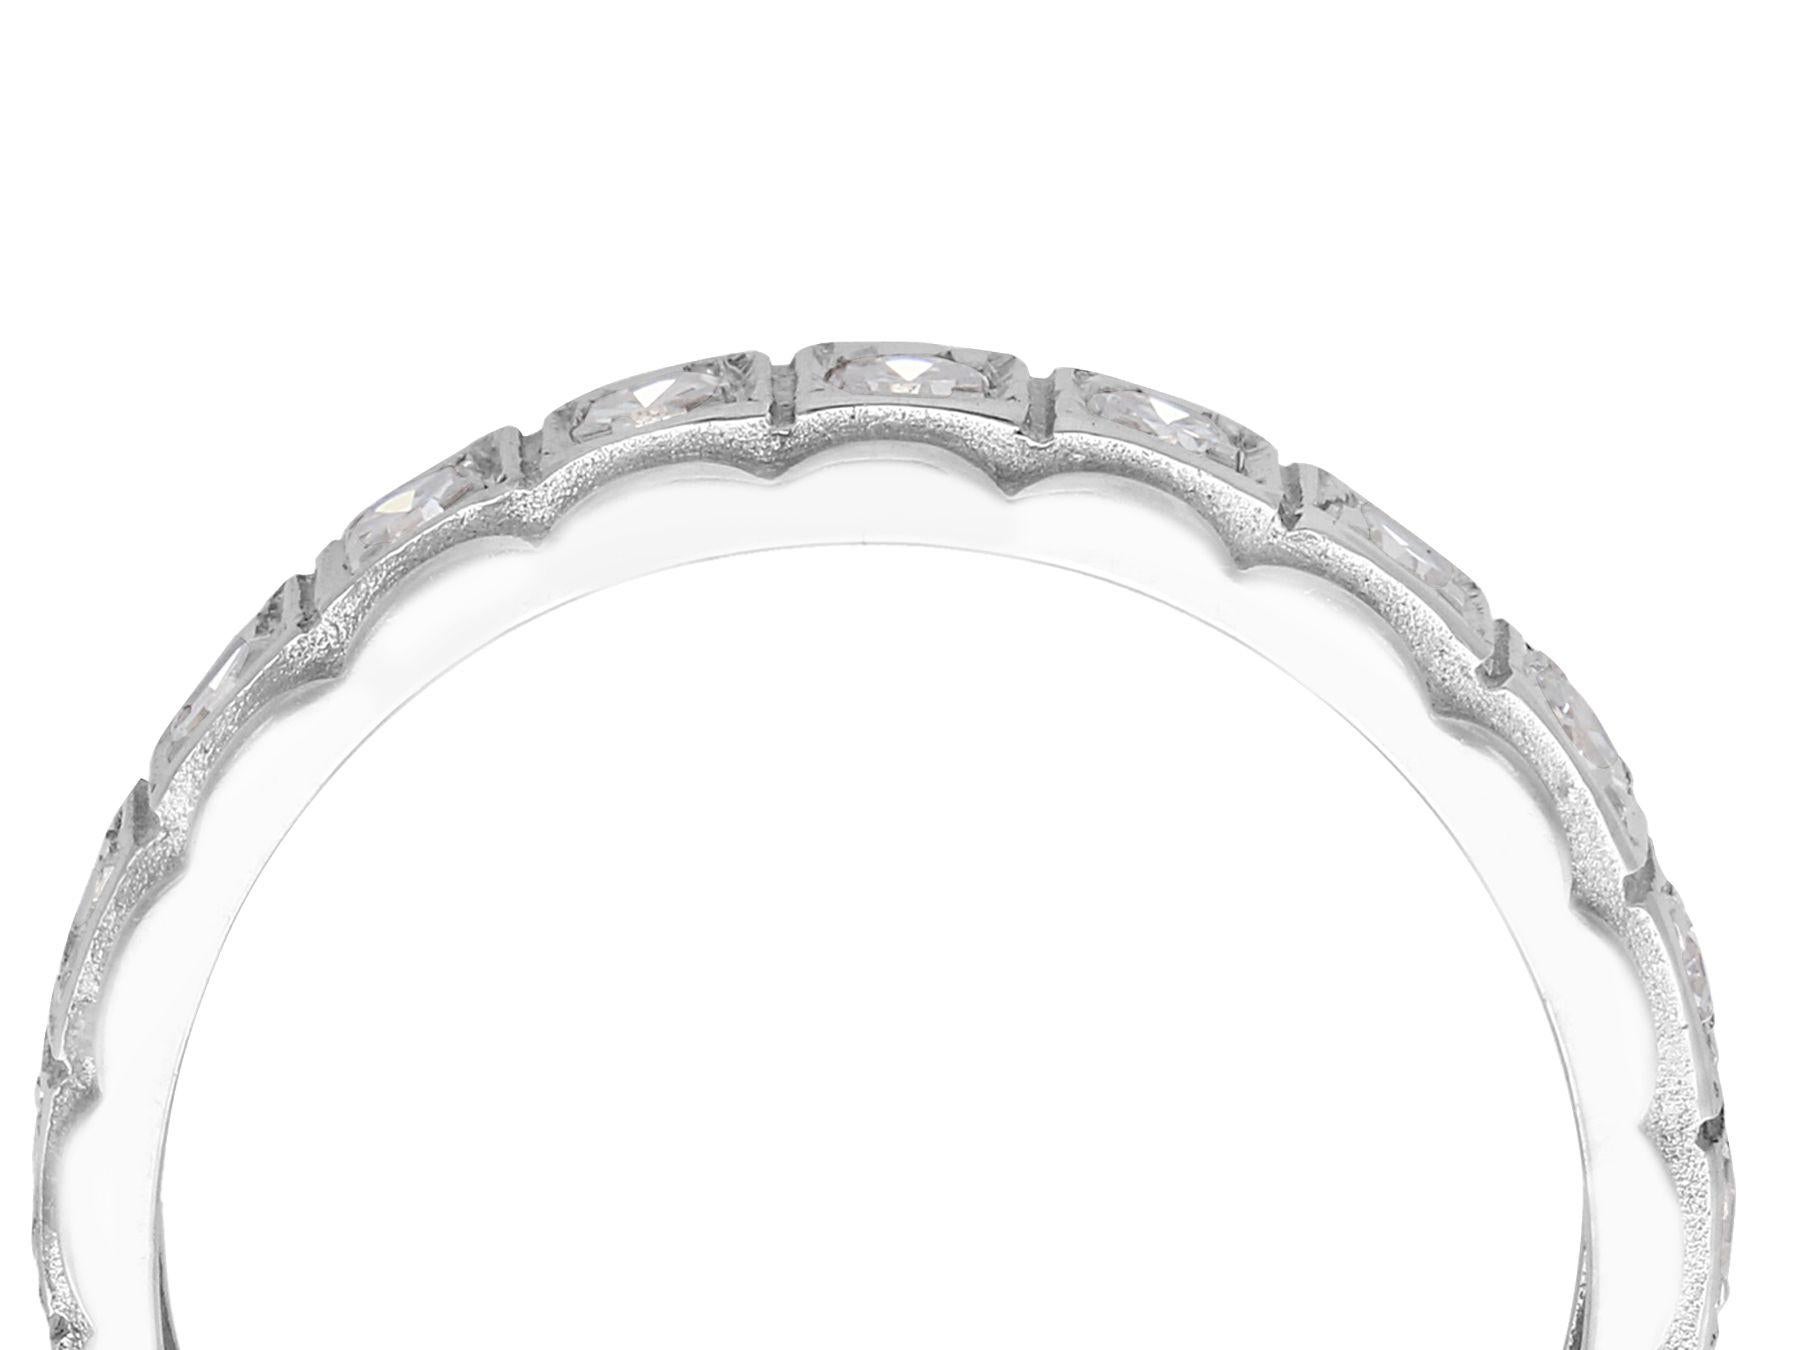 A fine and impressive vintage 0.75 carat diamond and 18 karat white gold full eternity ring; part of our vintage jewelry and estate jewelry collections.

This fine and impressive vintage eternity ring has been crafted in 18k white gold.

The